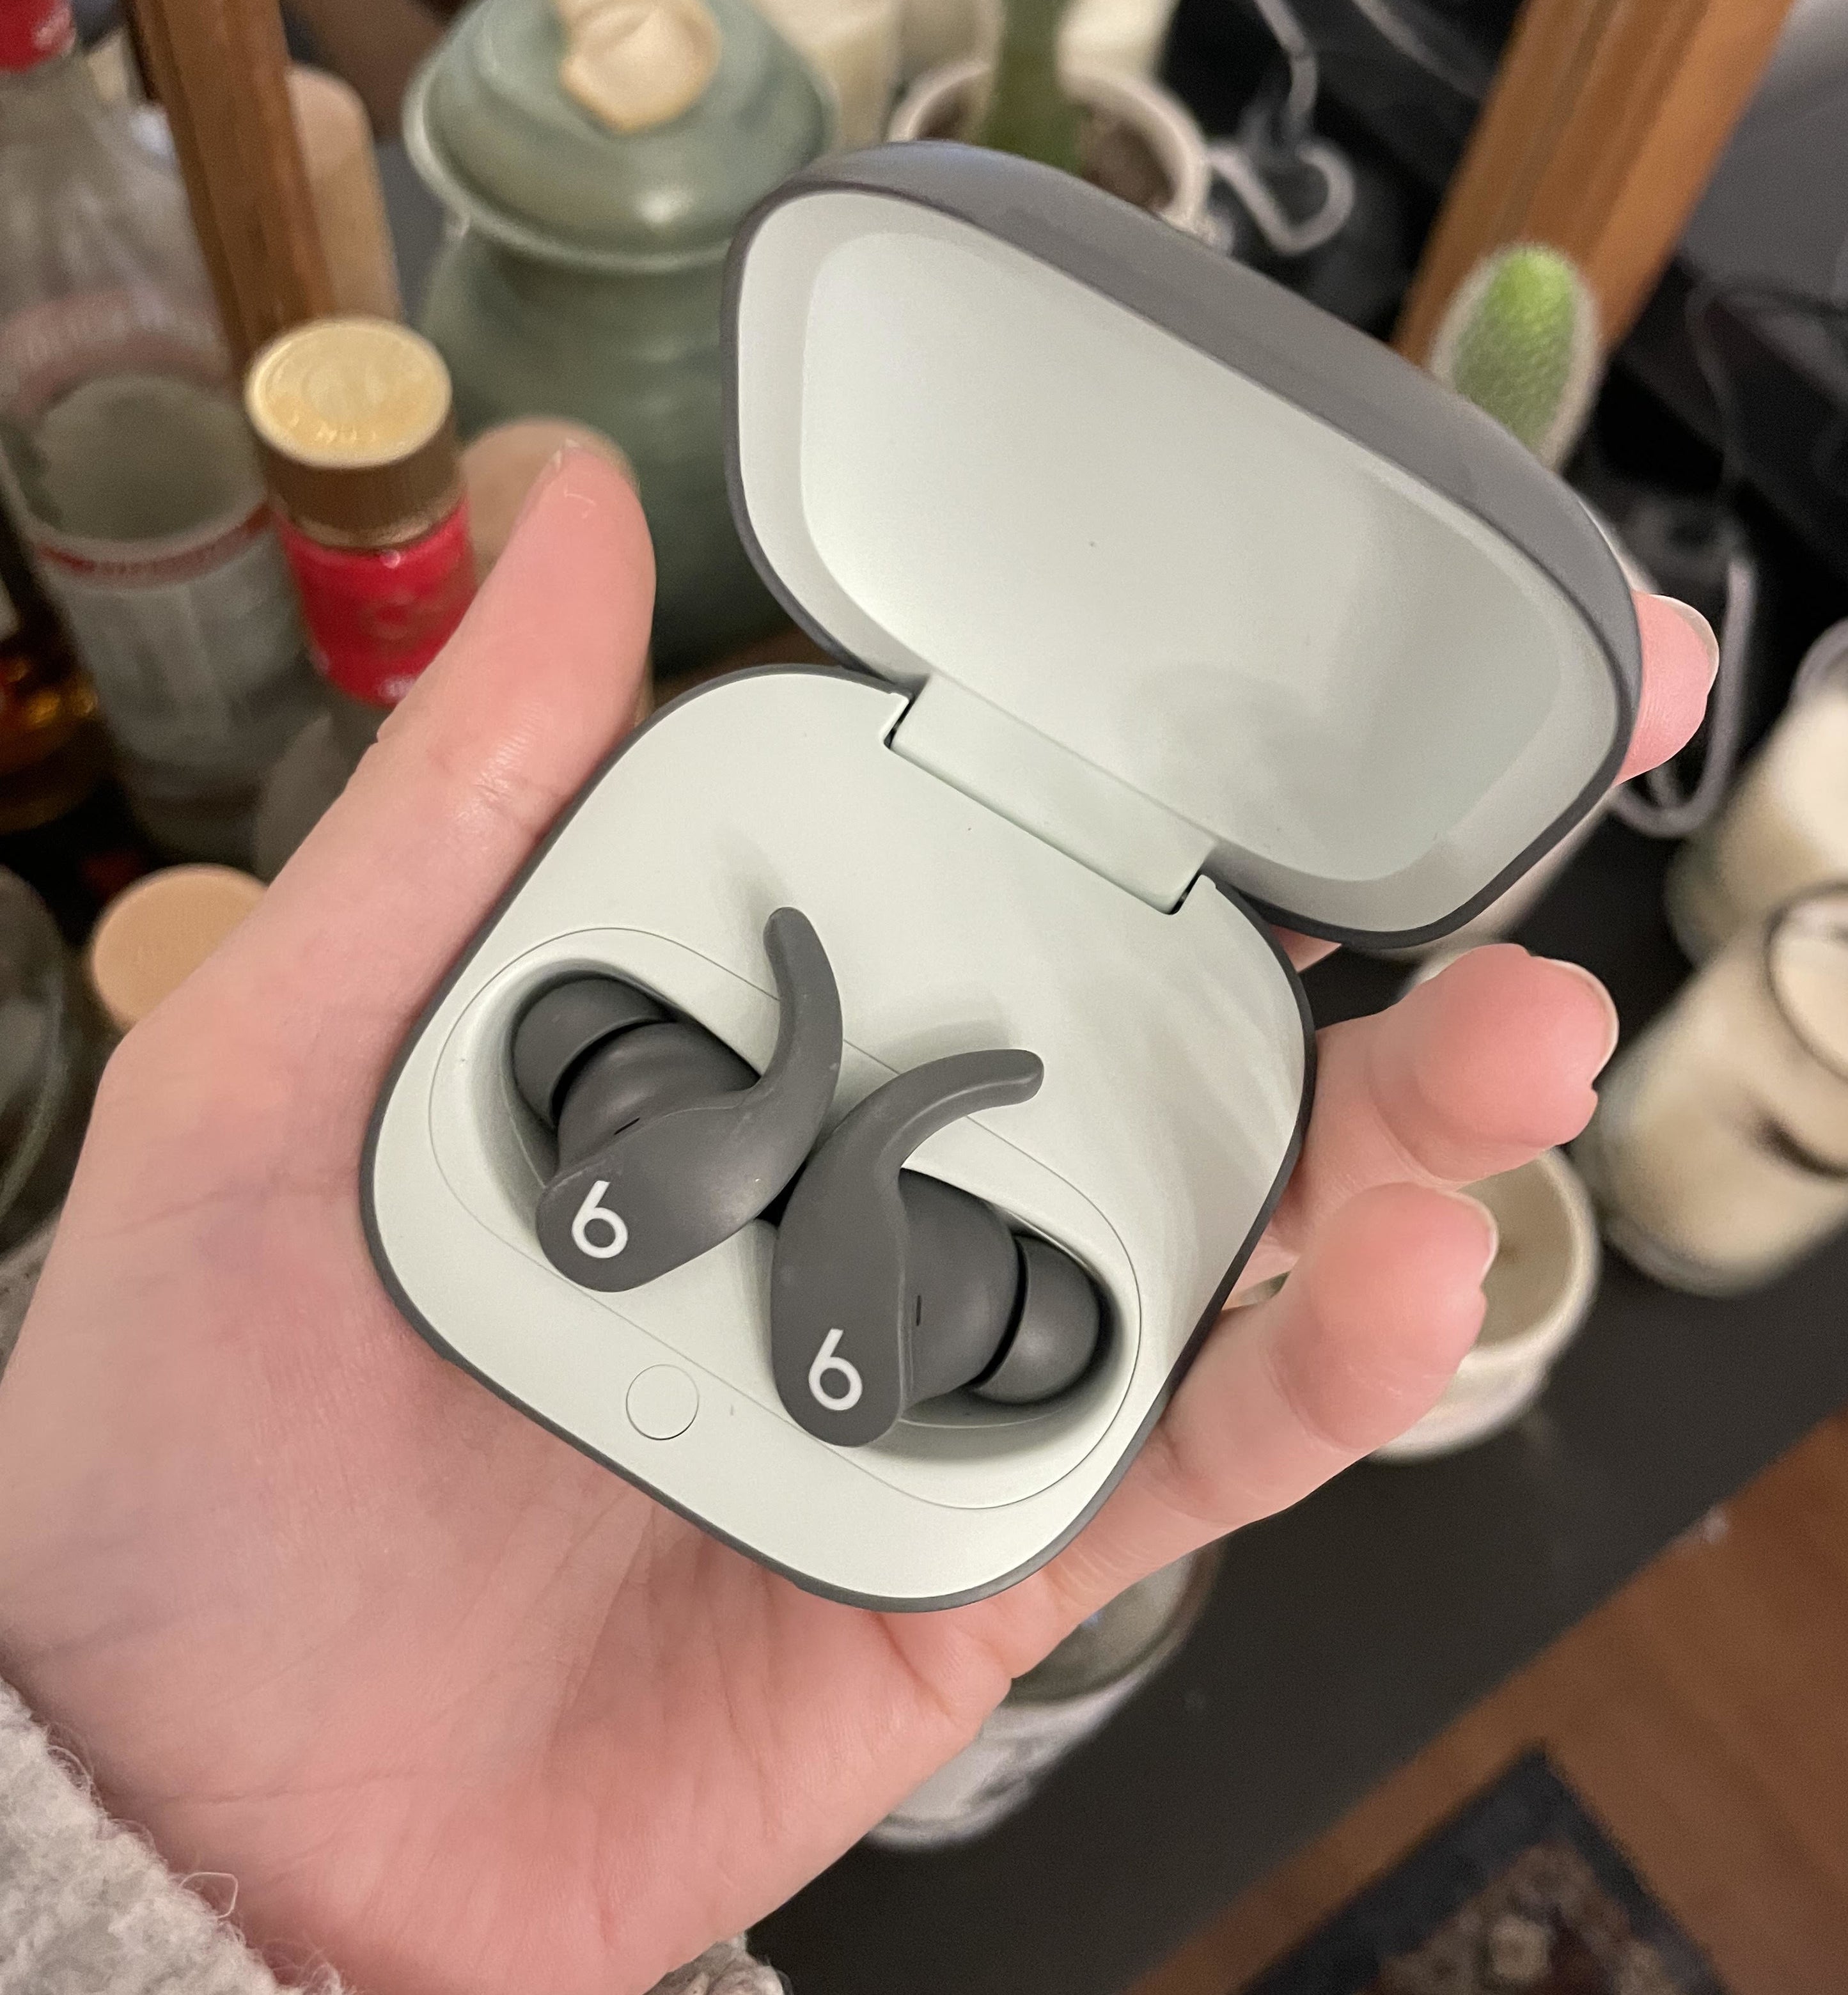 Alice holding the earbuds in their case